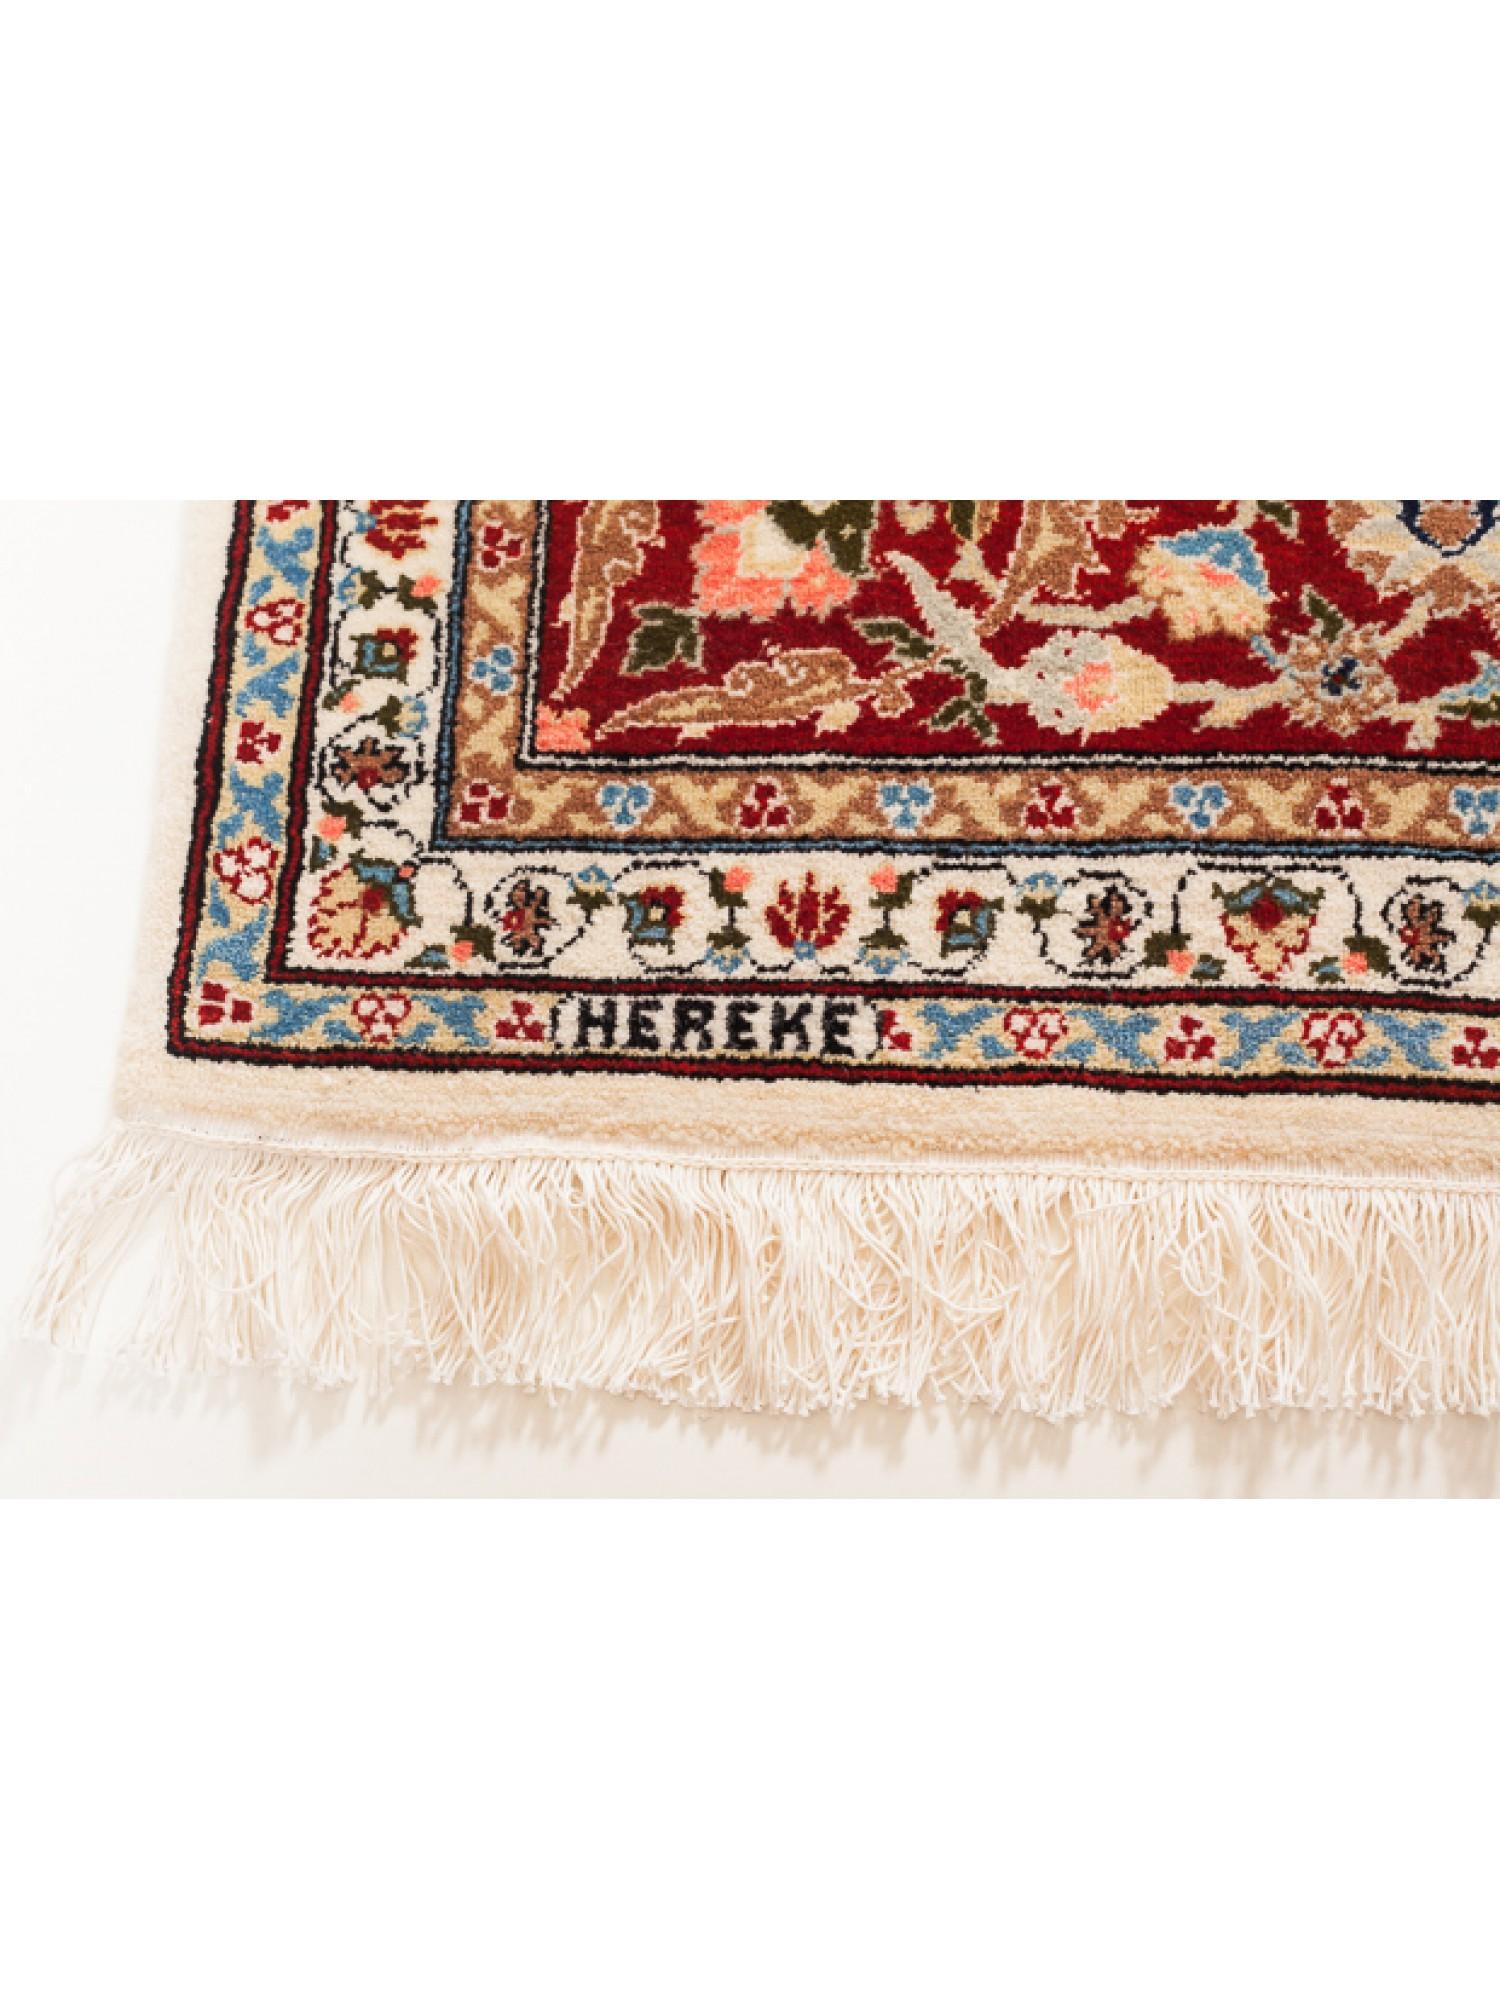 This unique Wool Hereke Carpet is among the highest-quality carpets in the Hereke workshop. There is a flower lattice on a white background with the fineness of the weave, the use of color, and the elegant and sophisticated design. It is a piece